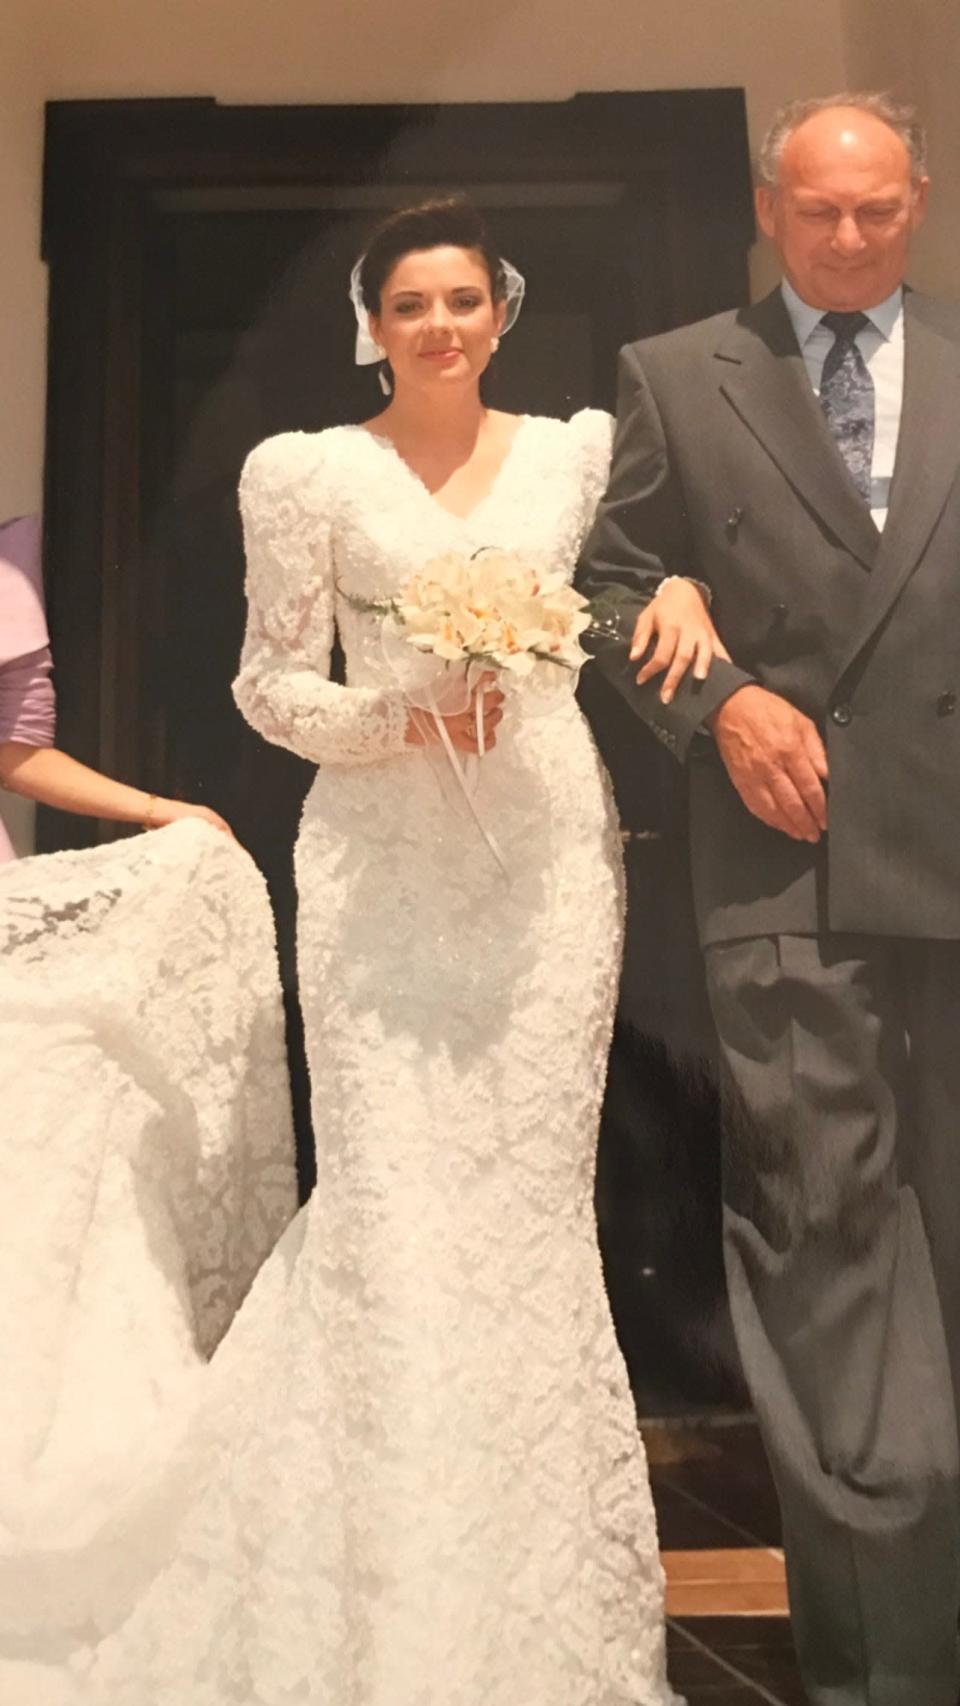 A photo of Rapp&#39;s mother from her wedding.